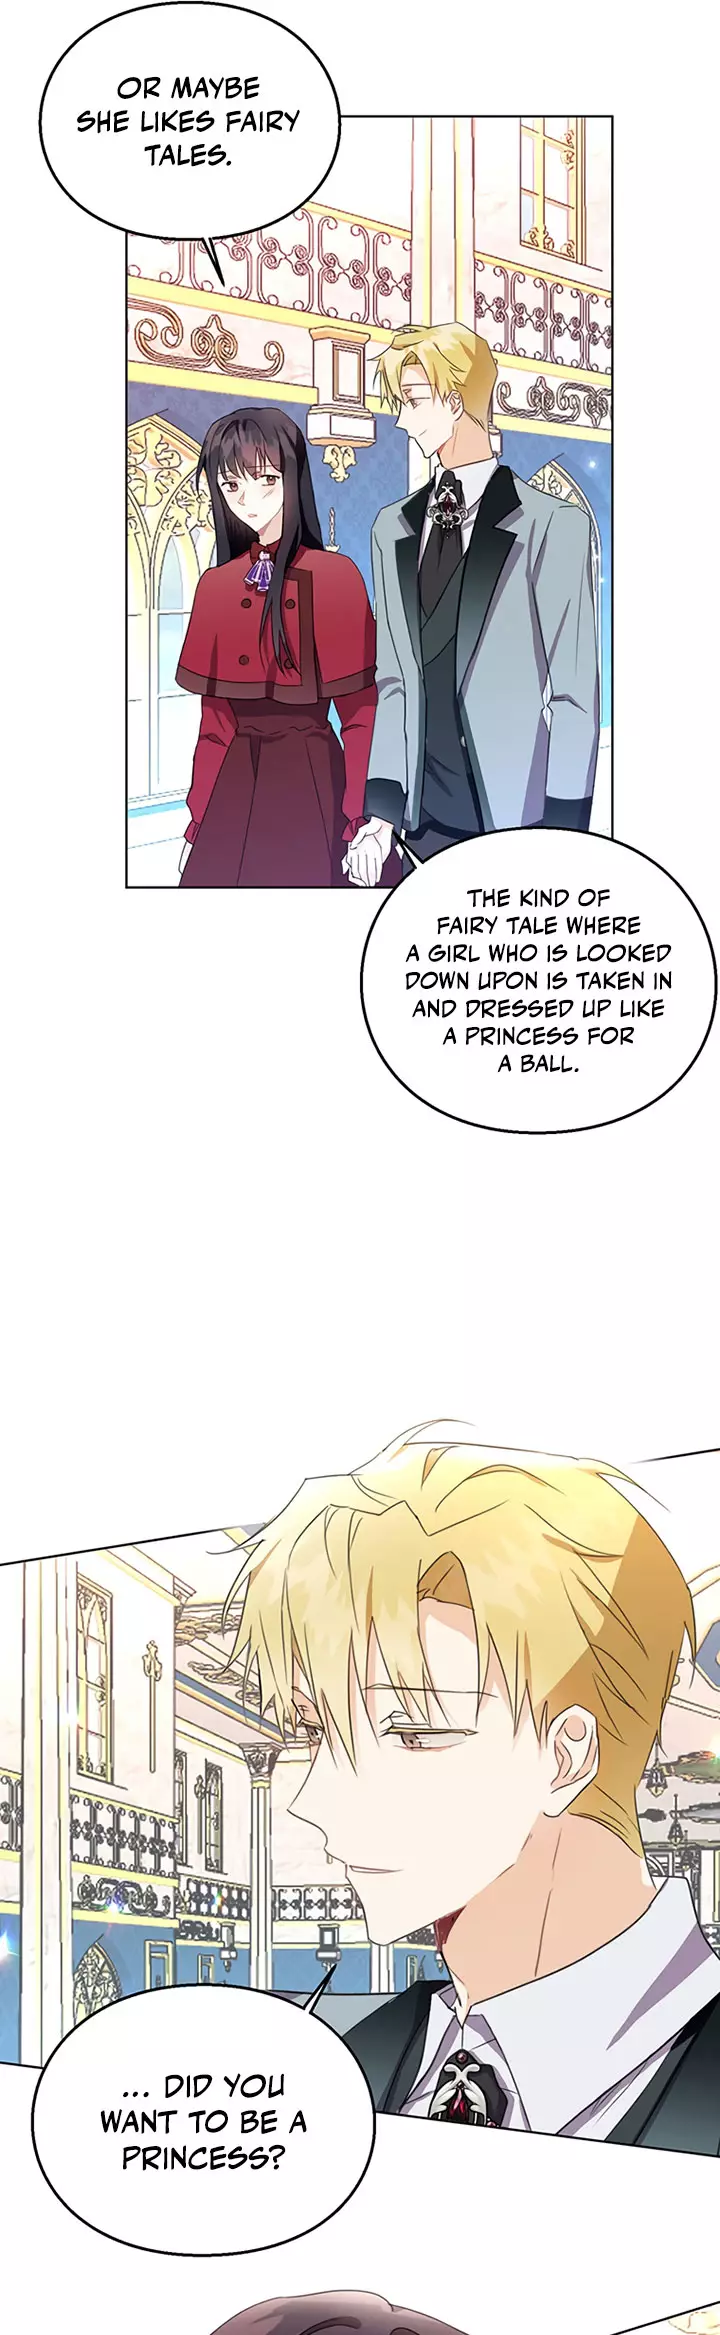 The Bad Ending Of The Otome Game - 10 page 29-84d36d5d